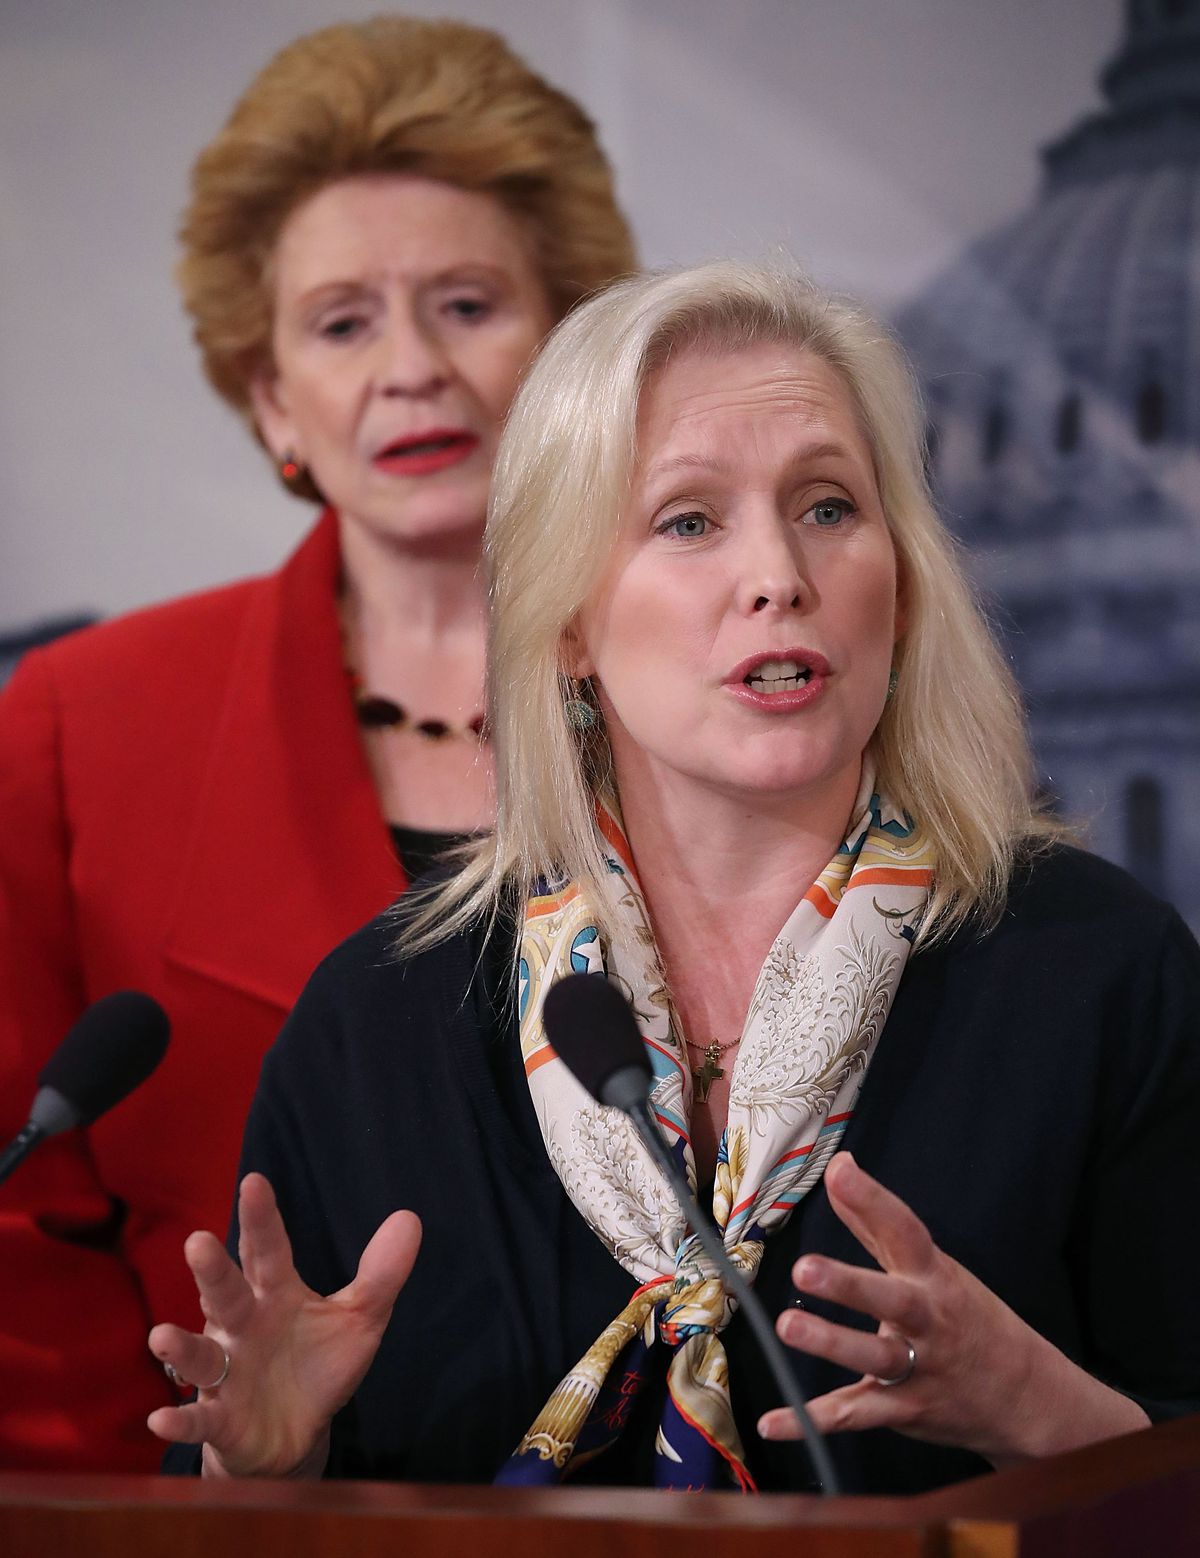 US Sen. Kirsten Gillibrand (D-NY) speaks at a press conference